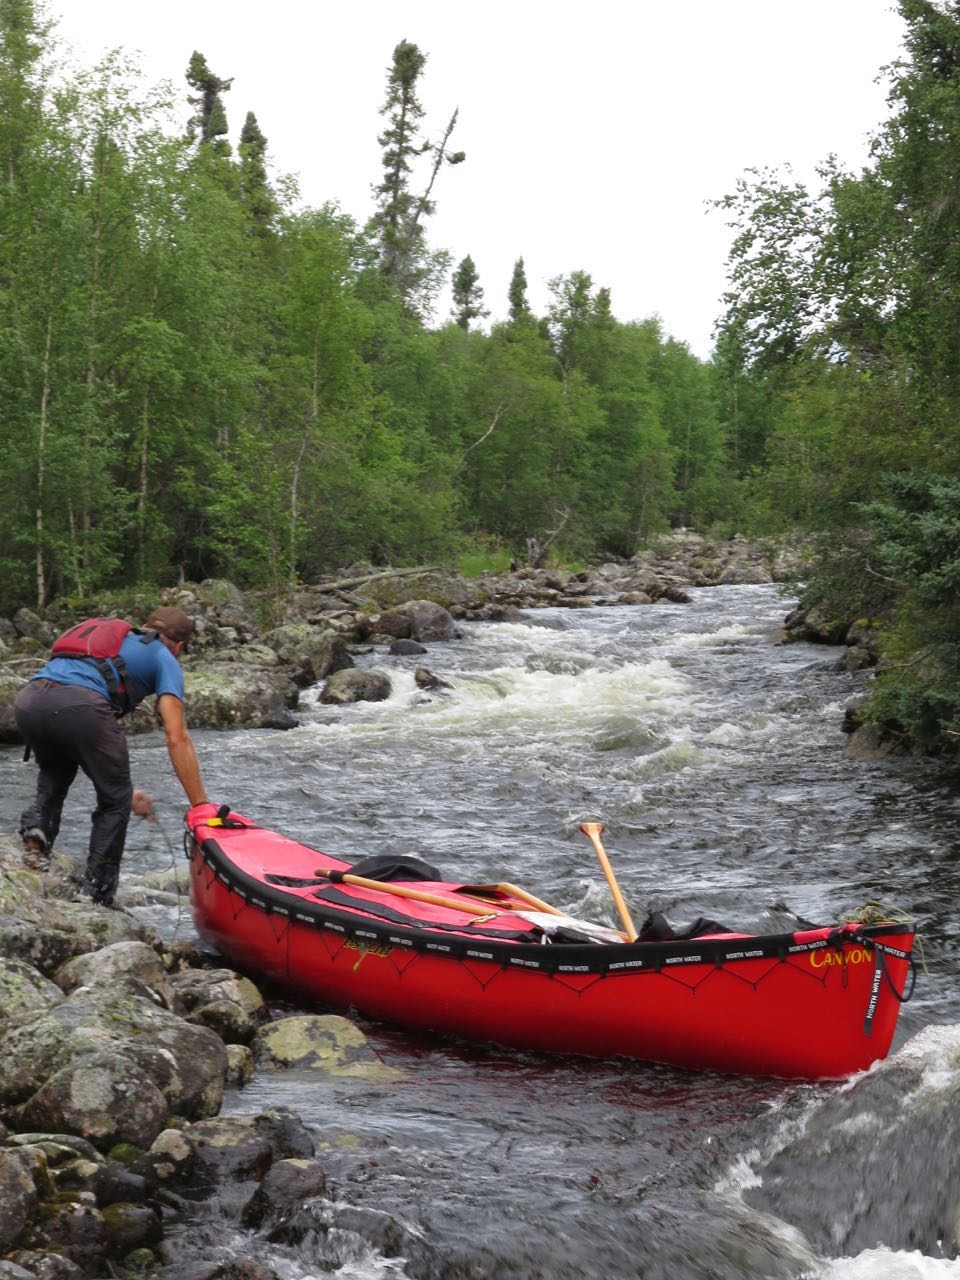 Testing the T-Formex canoe on rocky rivers